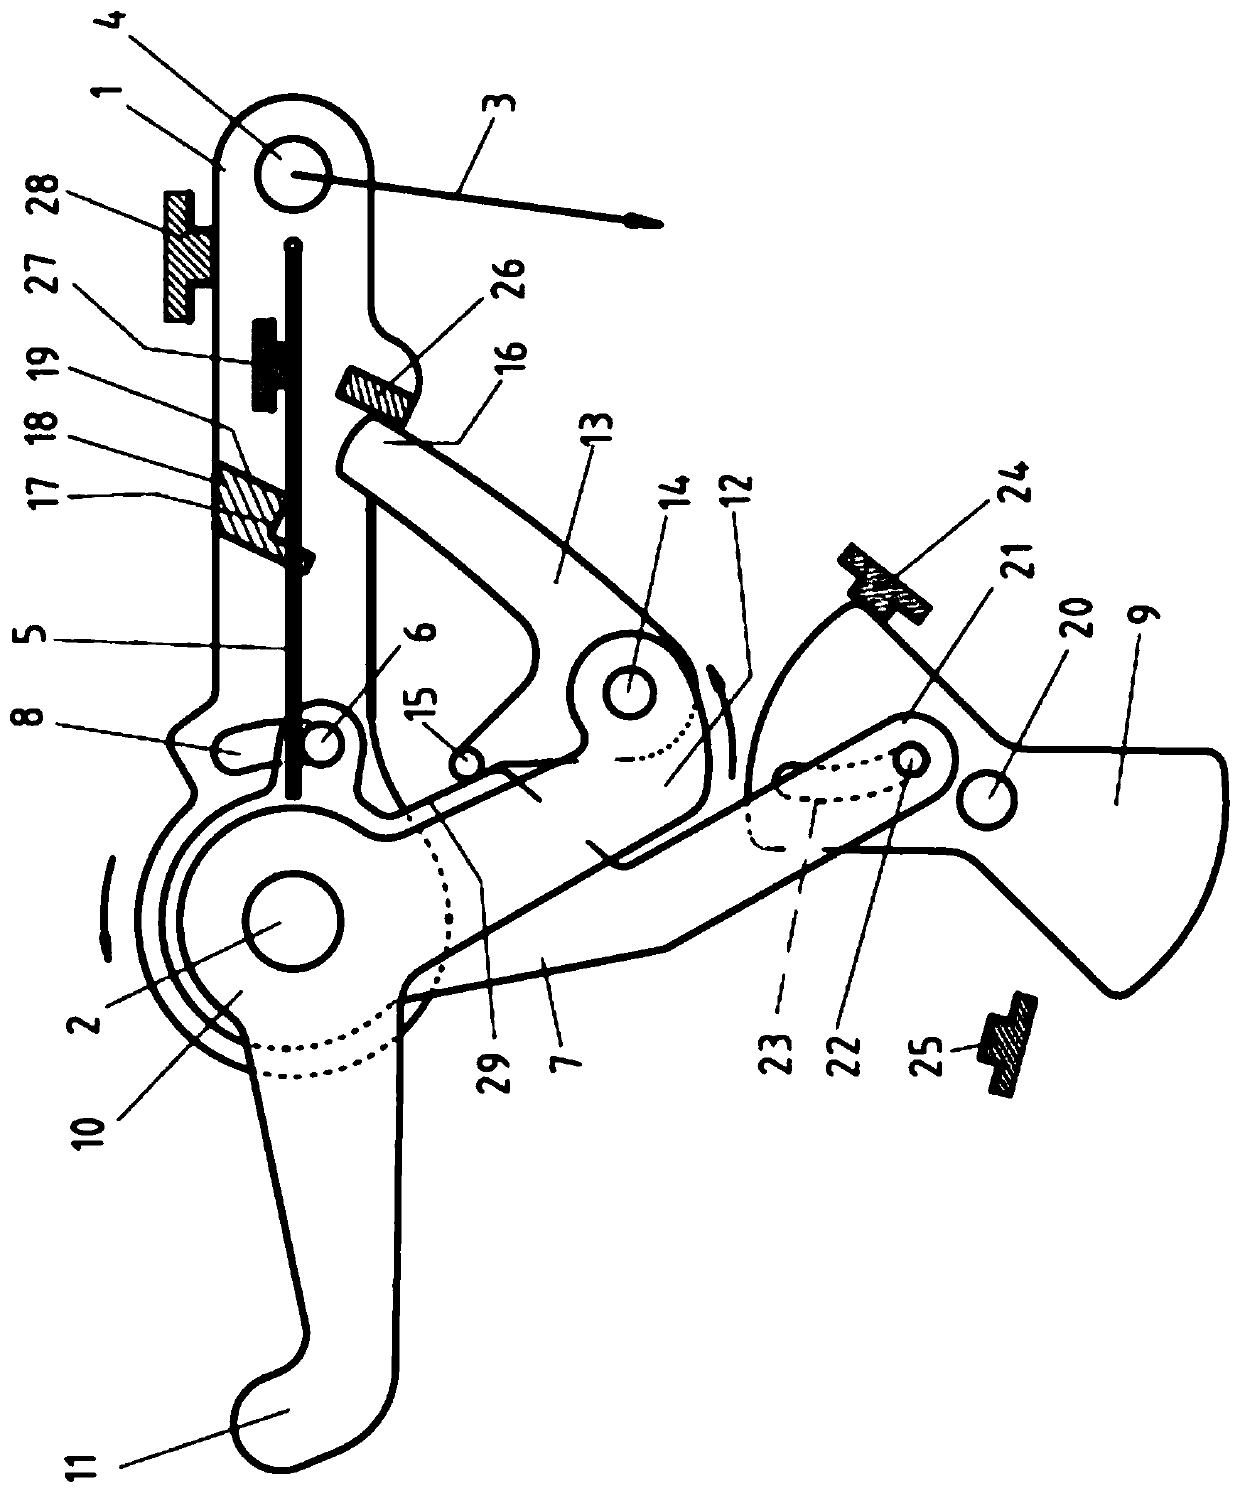 Actuating device for motor vehicle locks